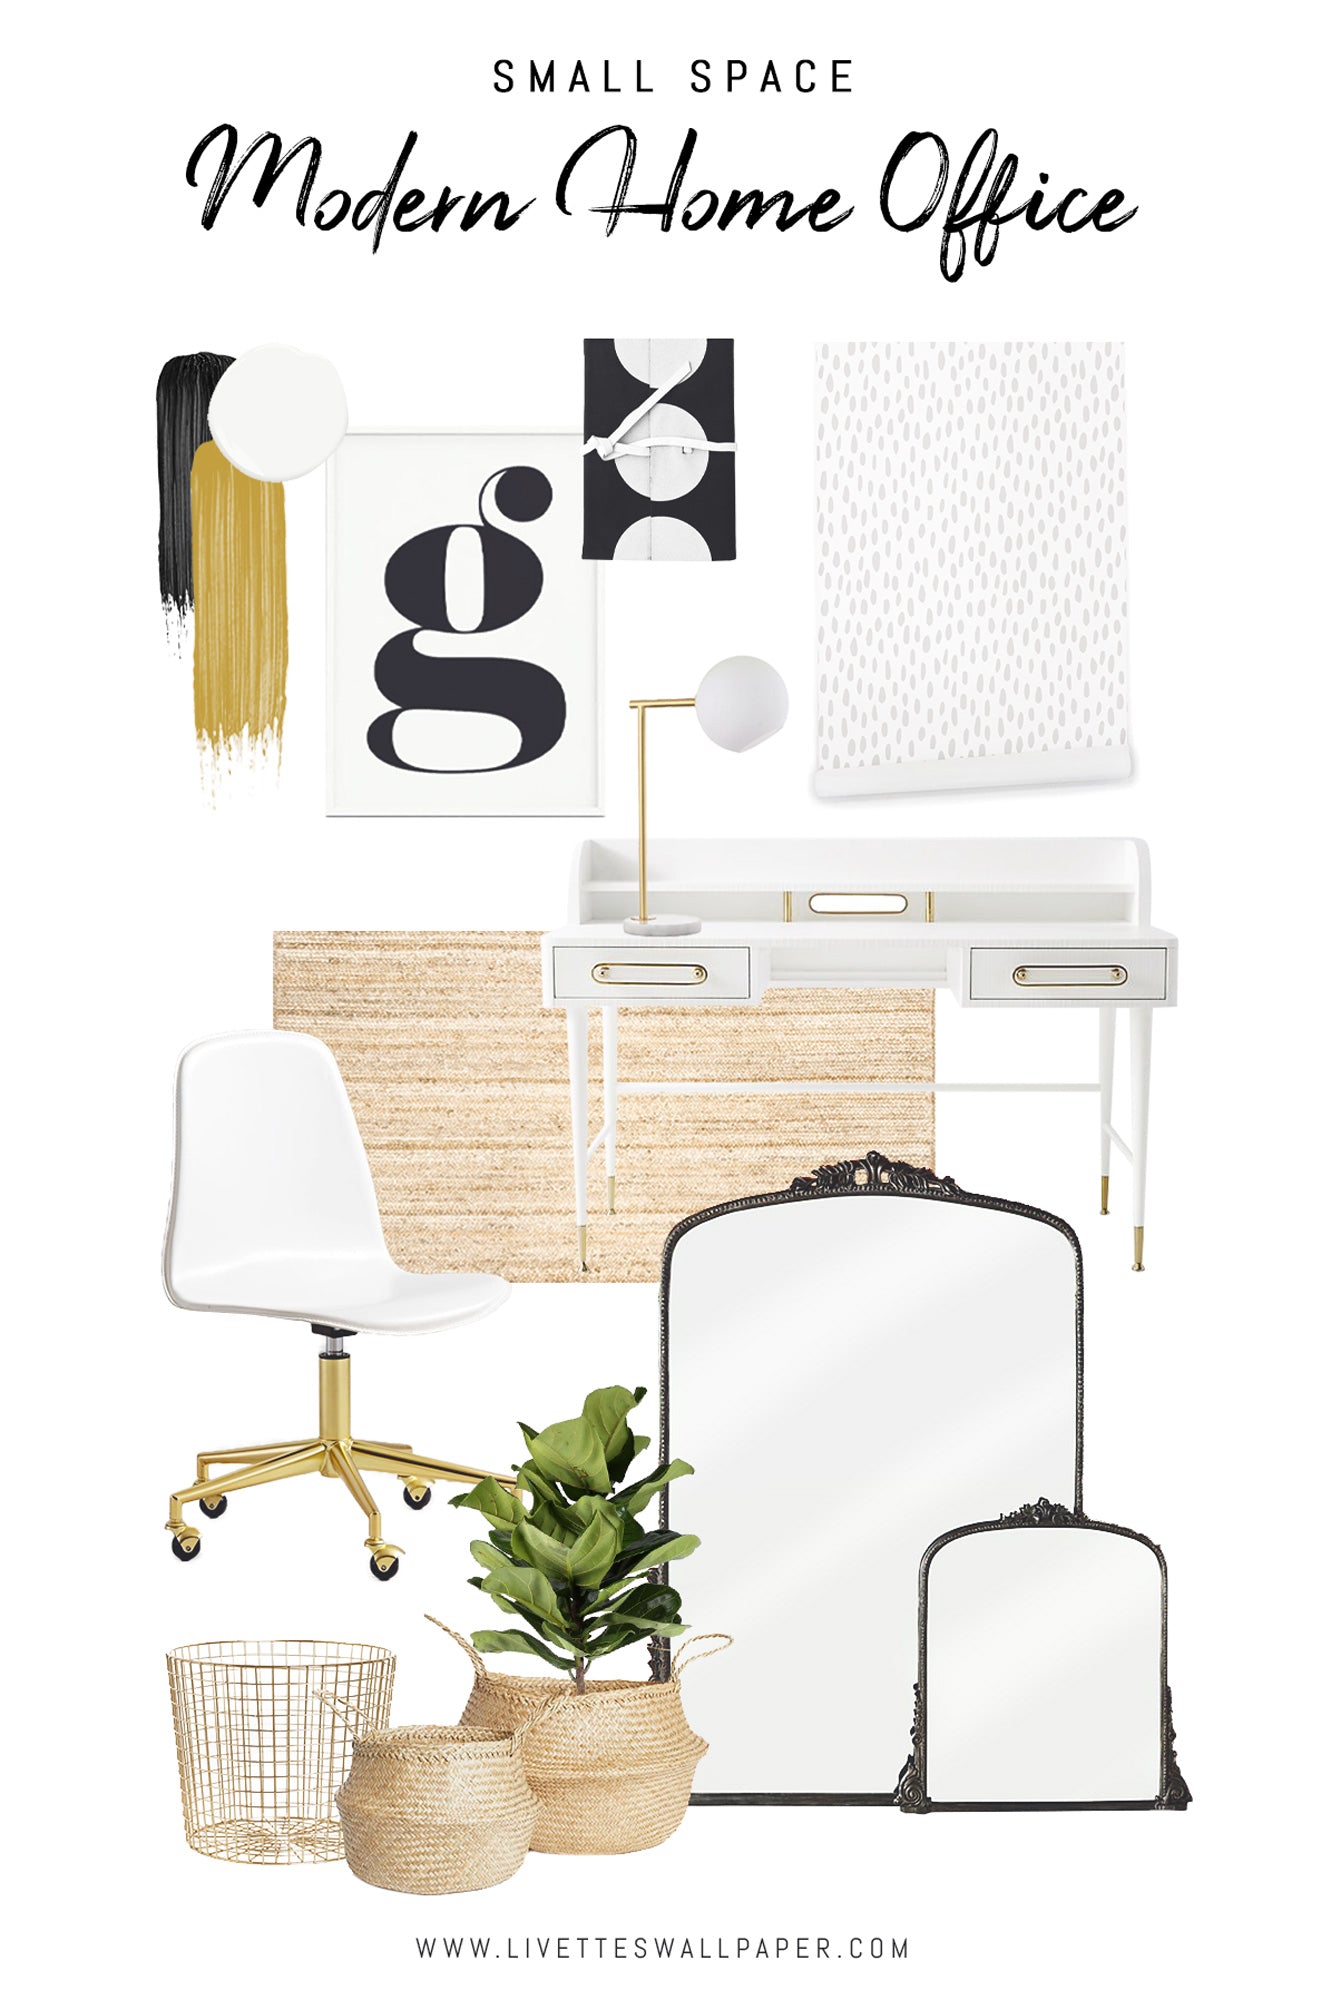 Small Space Home Office | MOOD BOARD MONDAY | Livettes